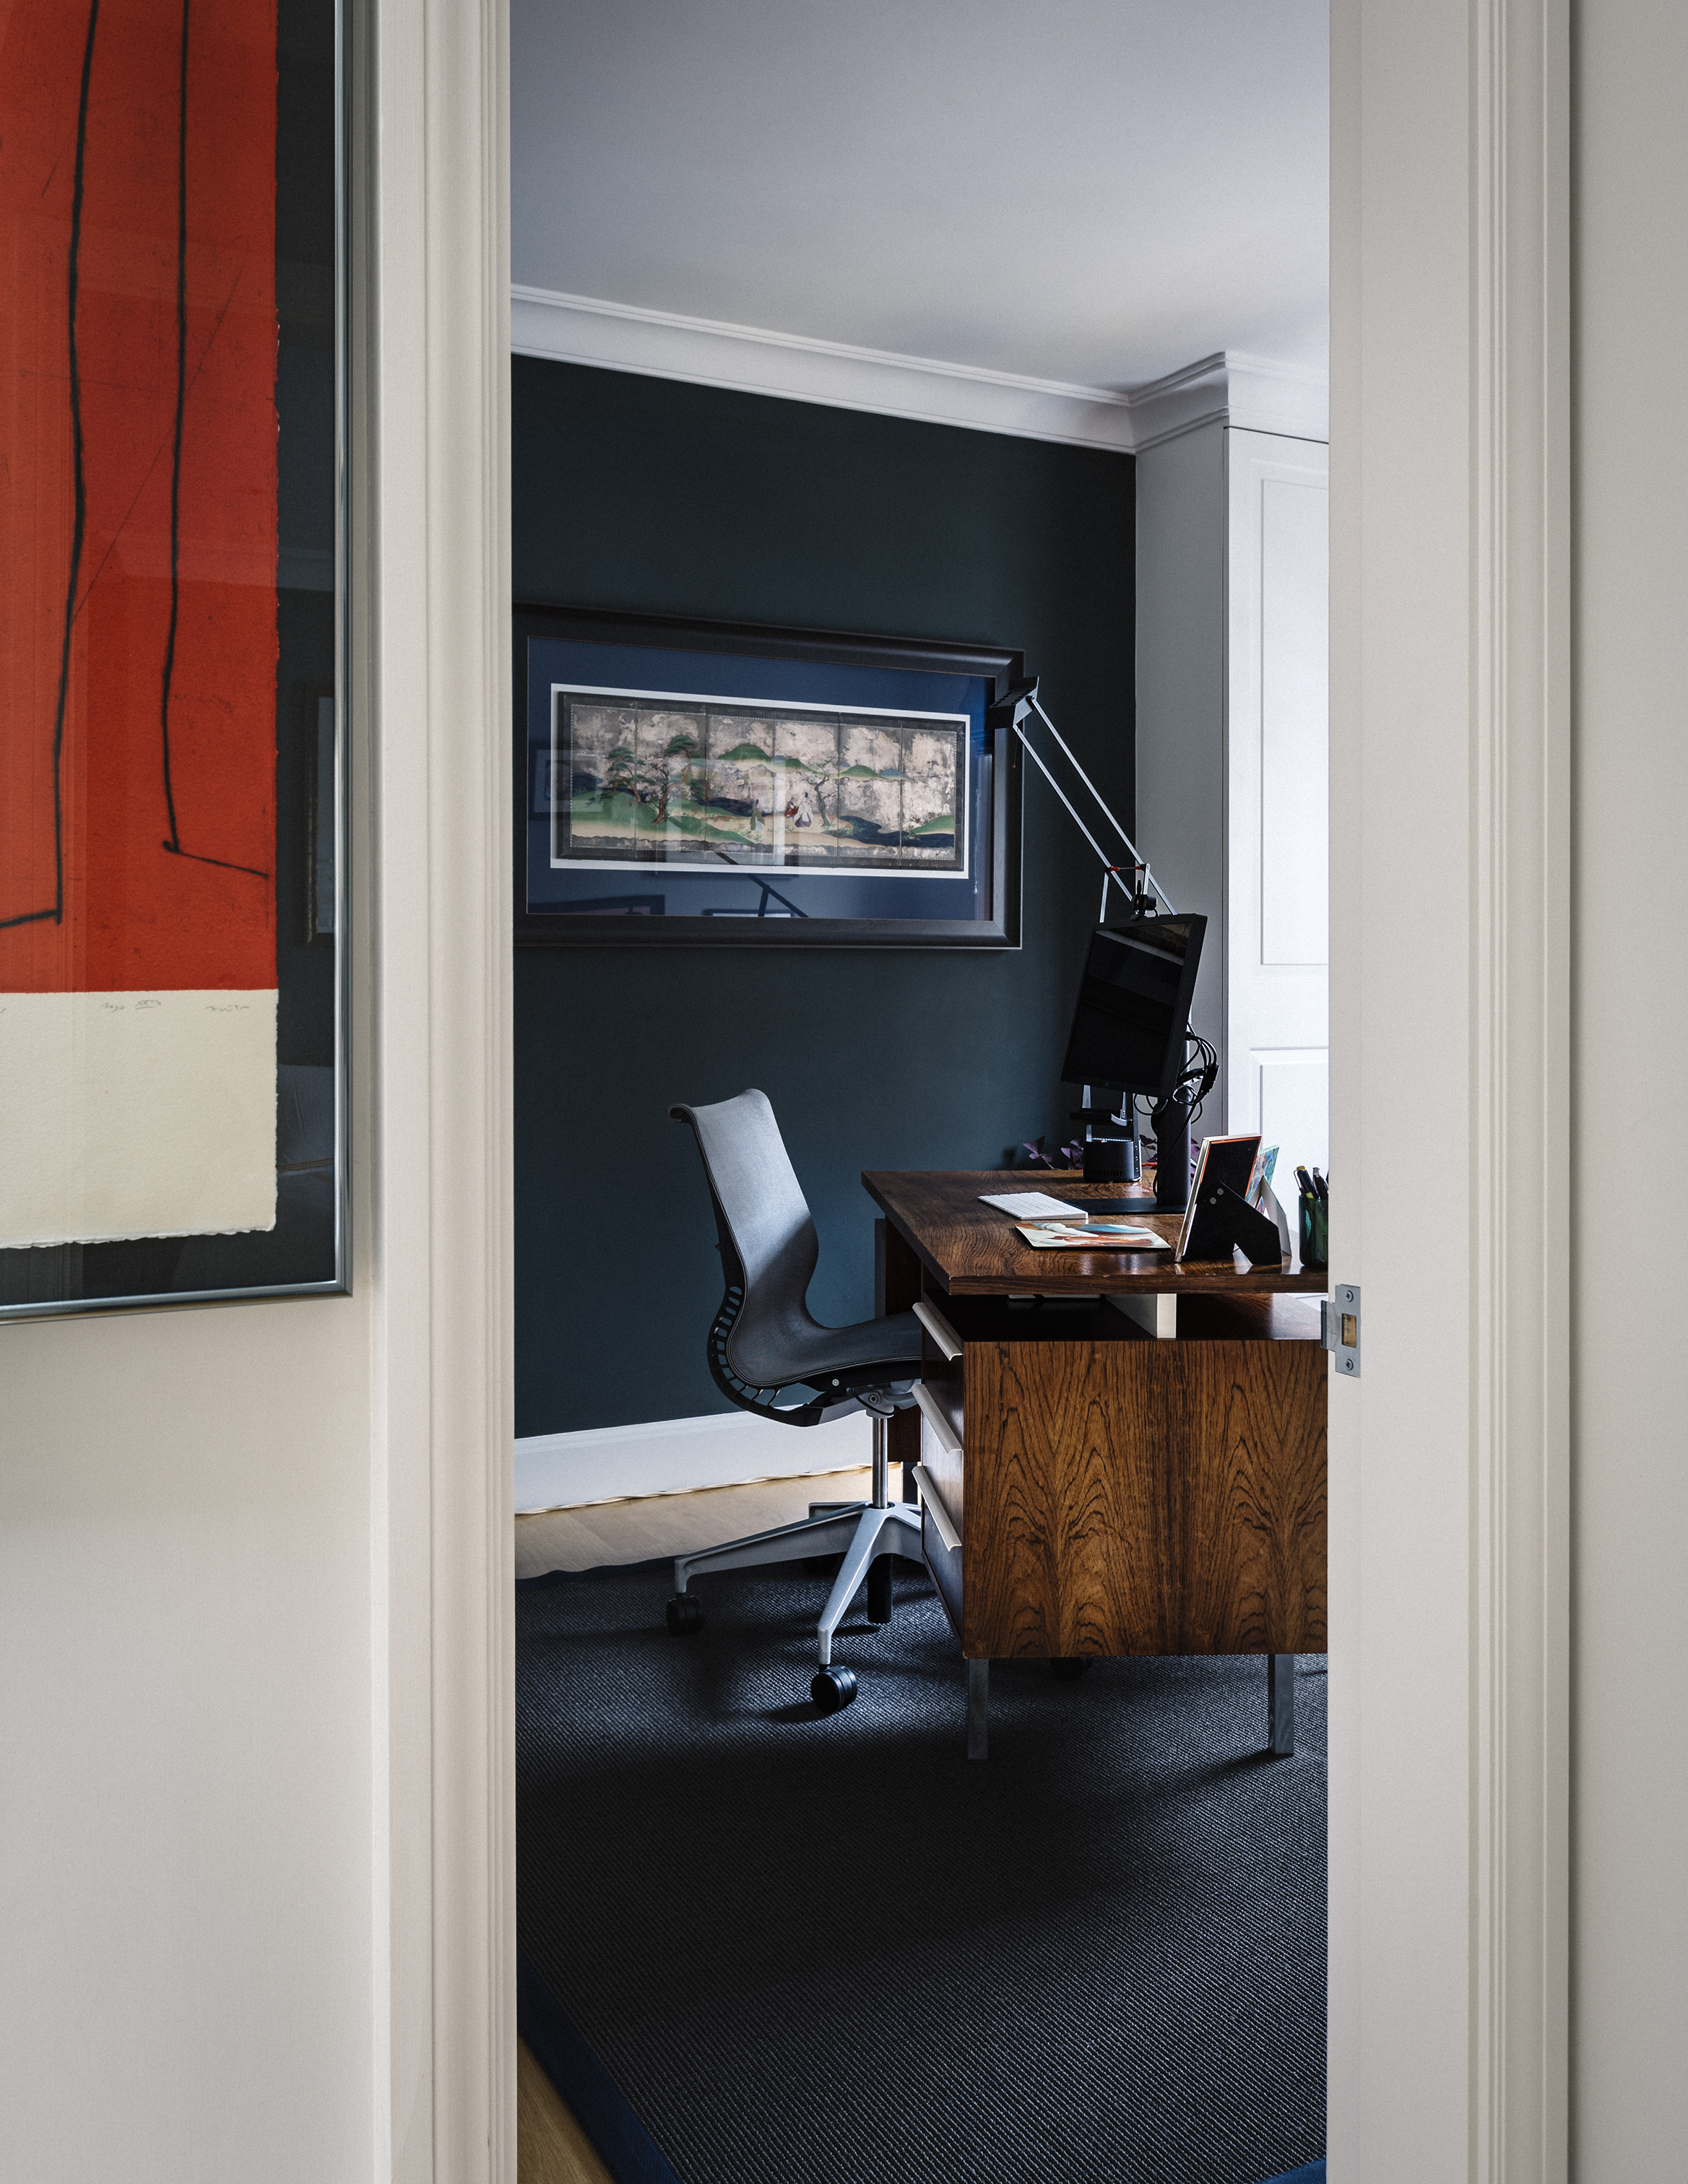 Deep blues and greens set off the glossy Mid-Century Modern desk in this home office